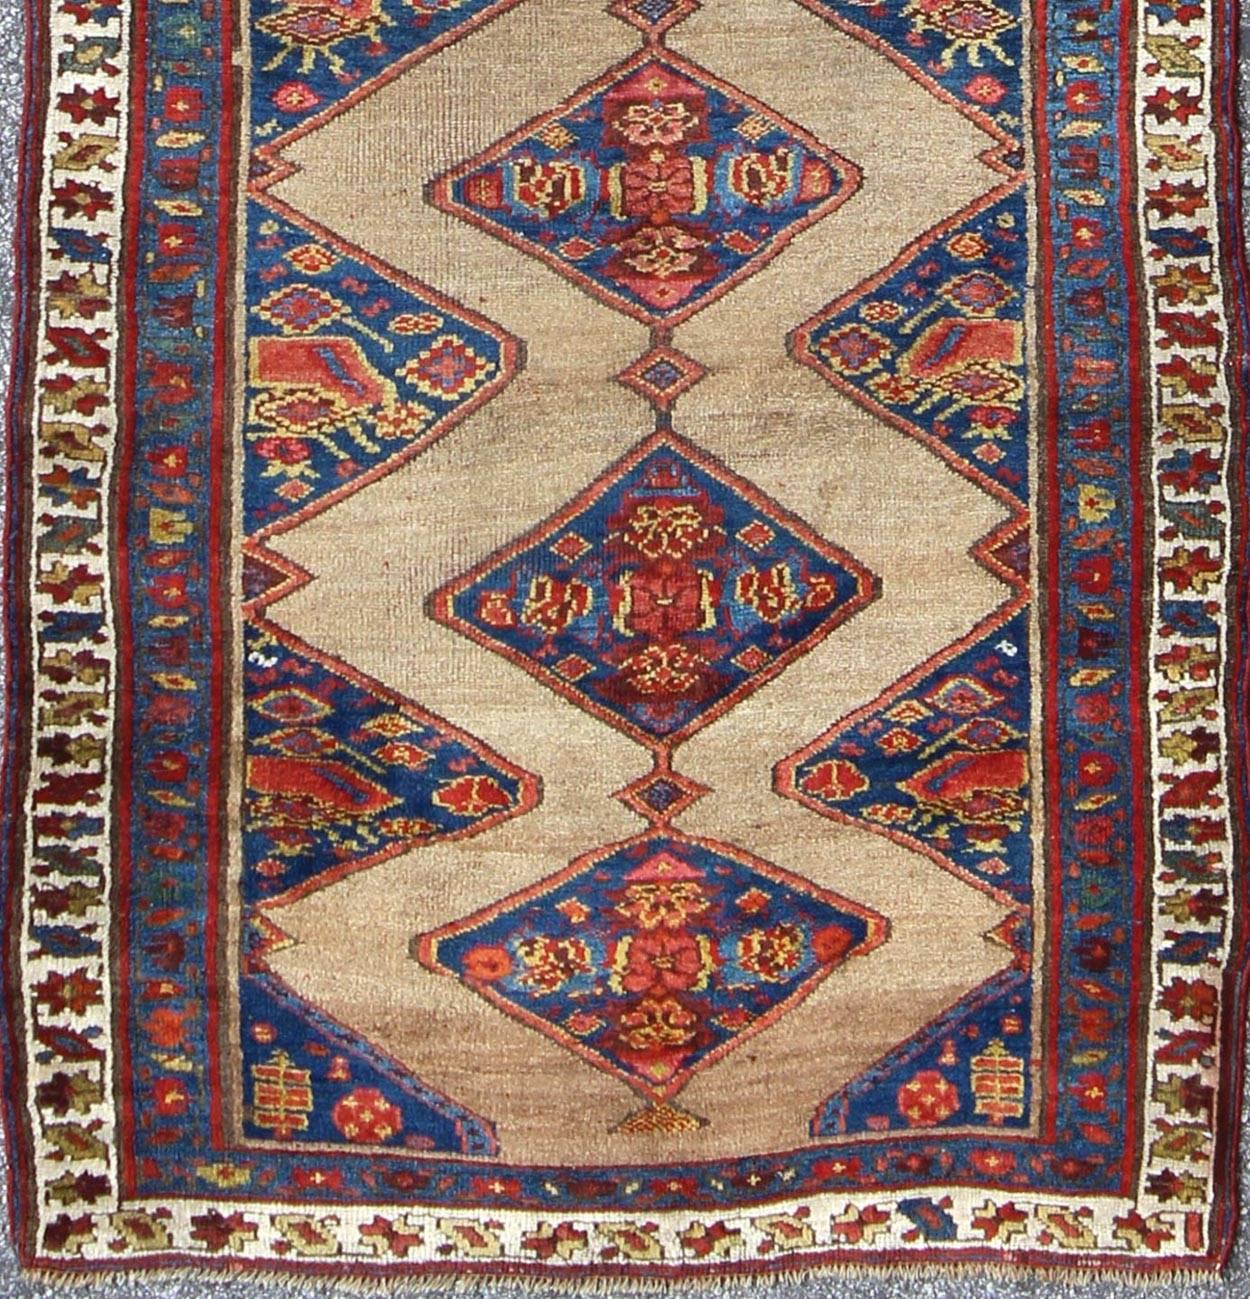 Antique Persian Serab Runner with Camel  rug/20940  origin/ persian

The navy blue and camel field in this piece is decorated with multicolored strap work, lattice work and stylized Boteh and floral elements. Beautifully drawn ivory and blue borders